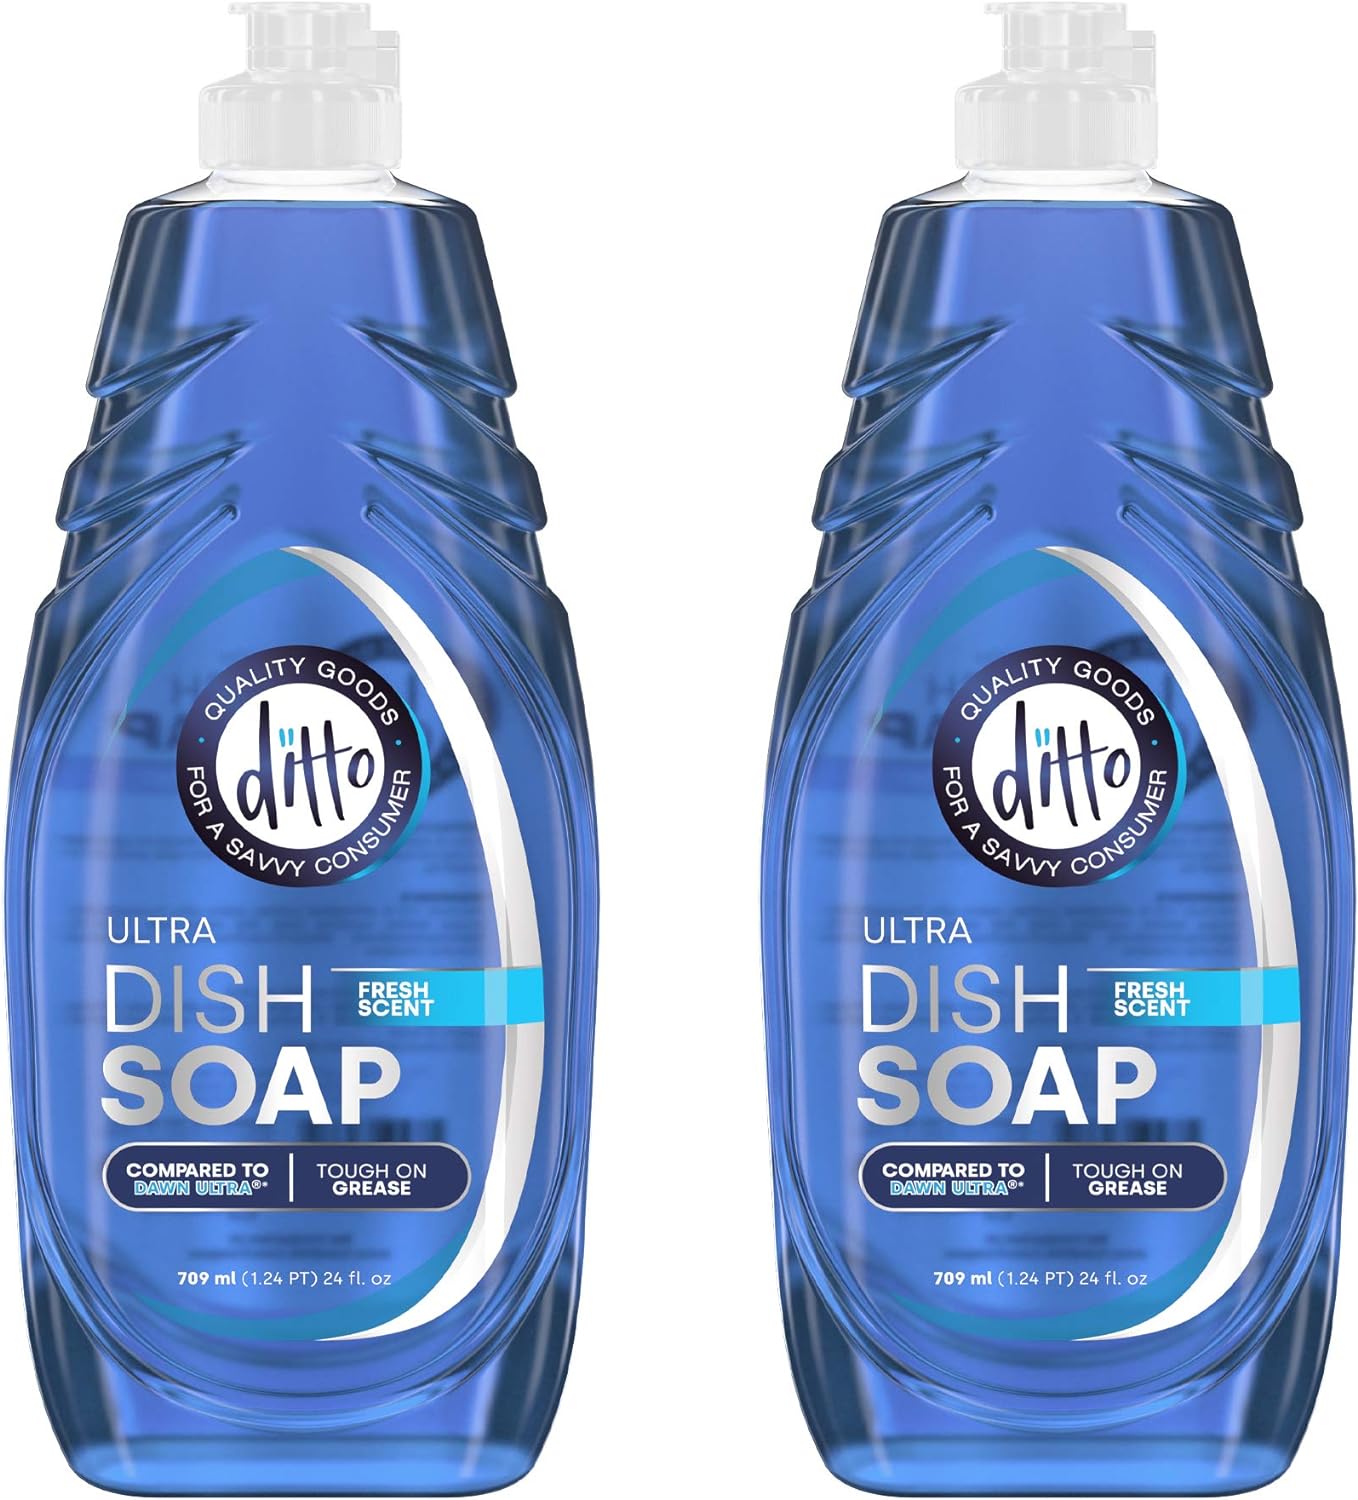 Ditto Ultra Dish Soap (Ultra) 48 fl Oz - 2 Pack - Extra Tough On Grease & Stains